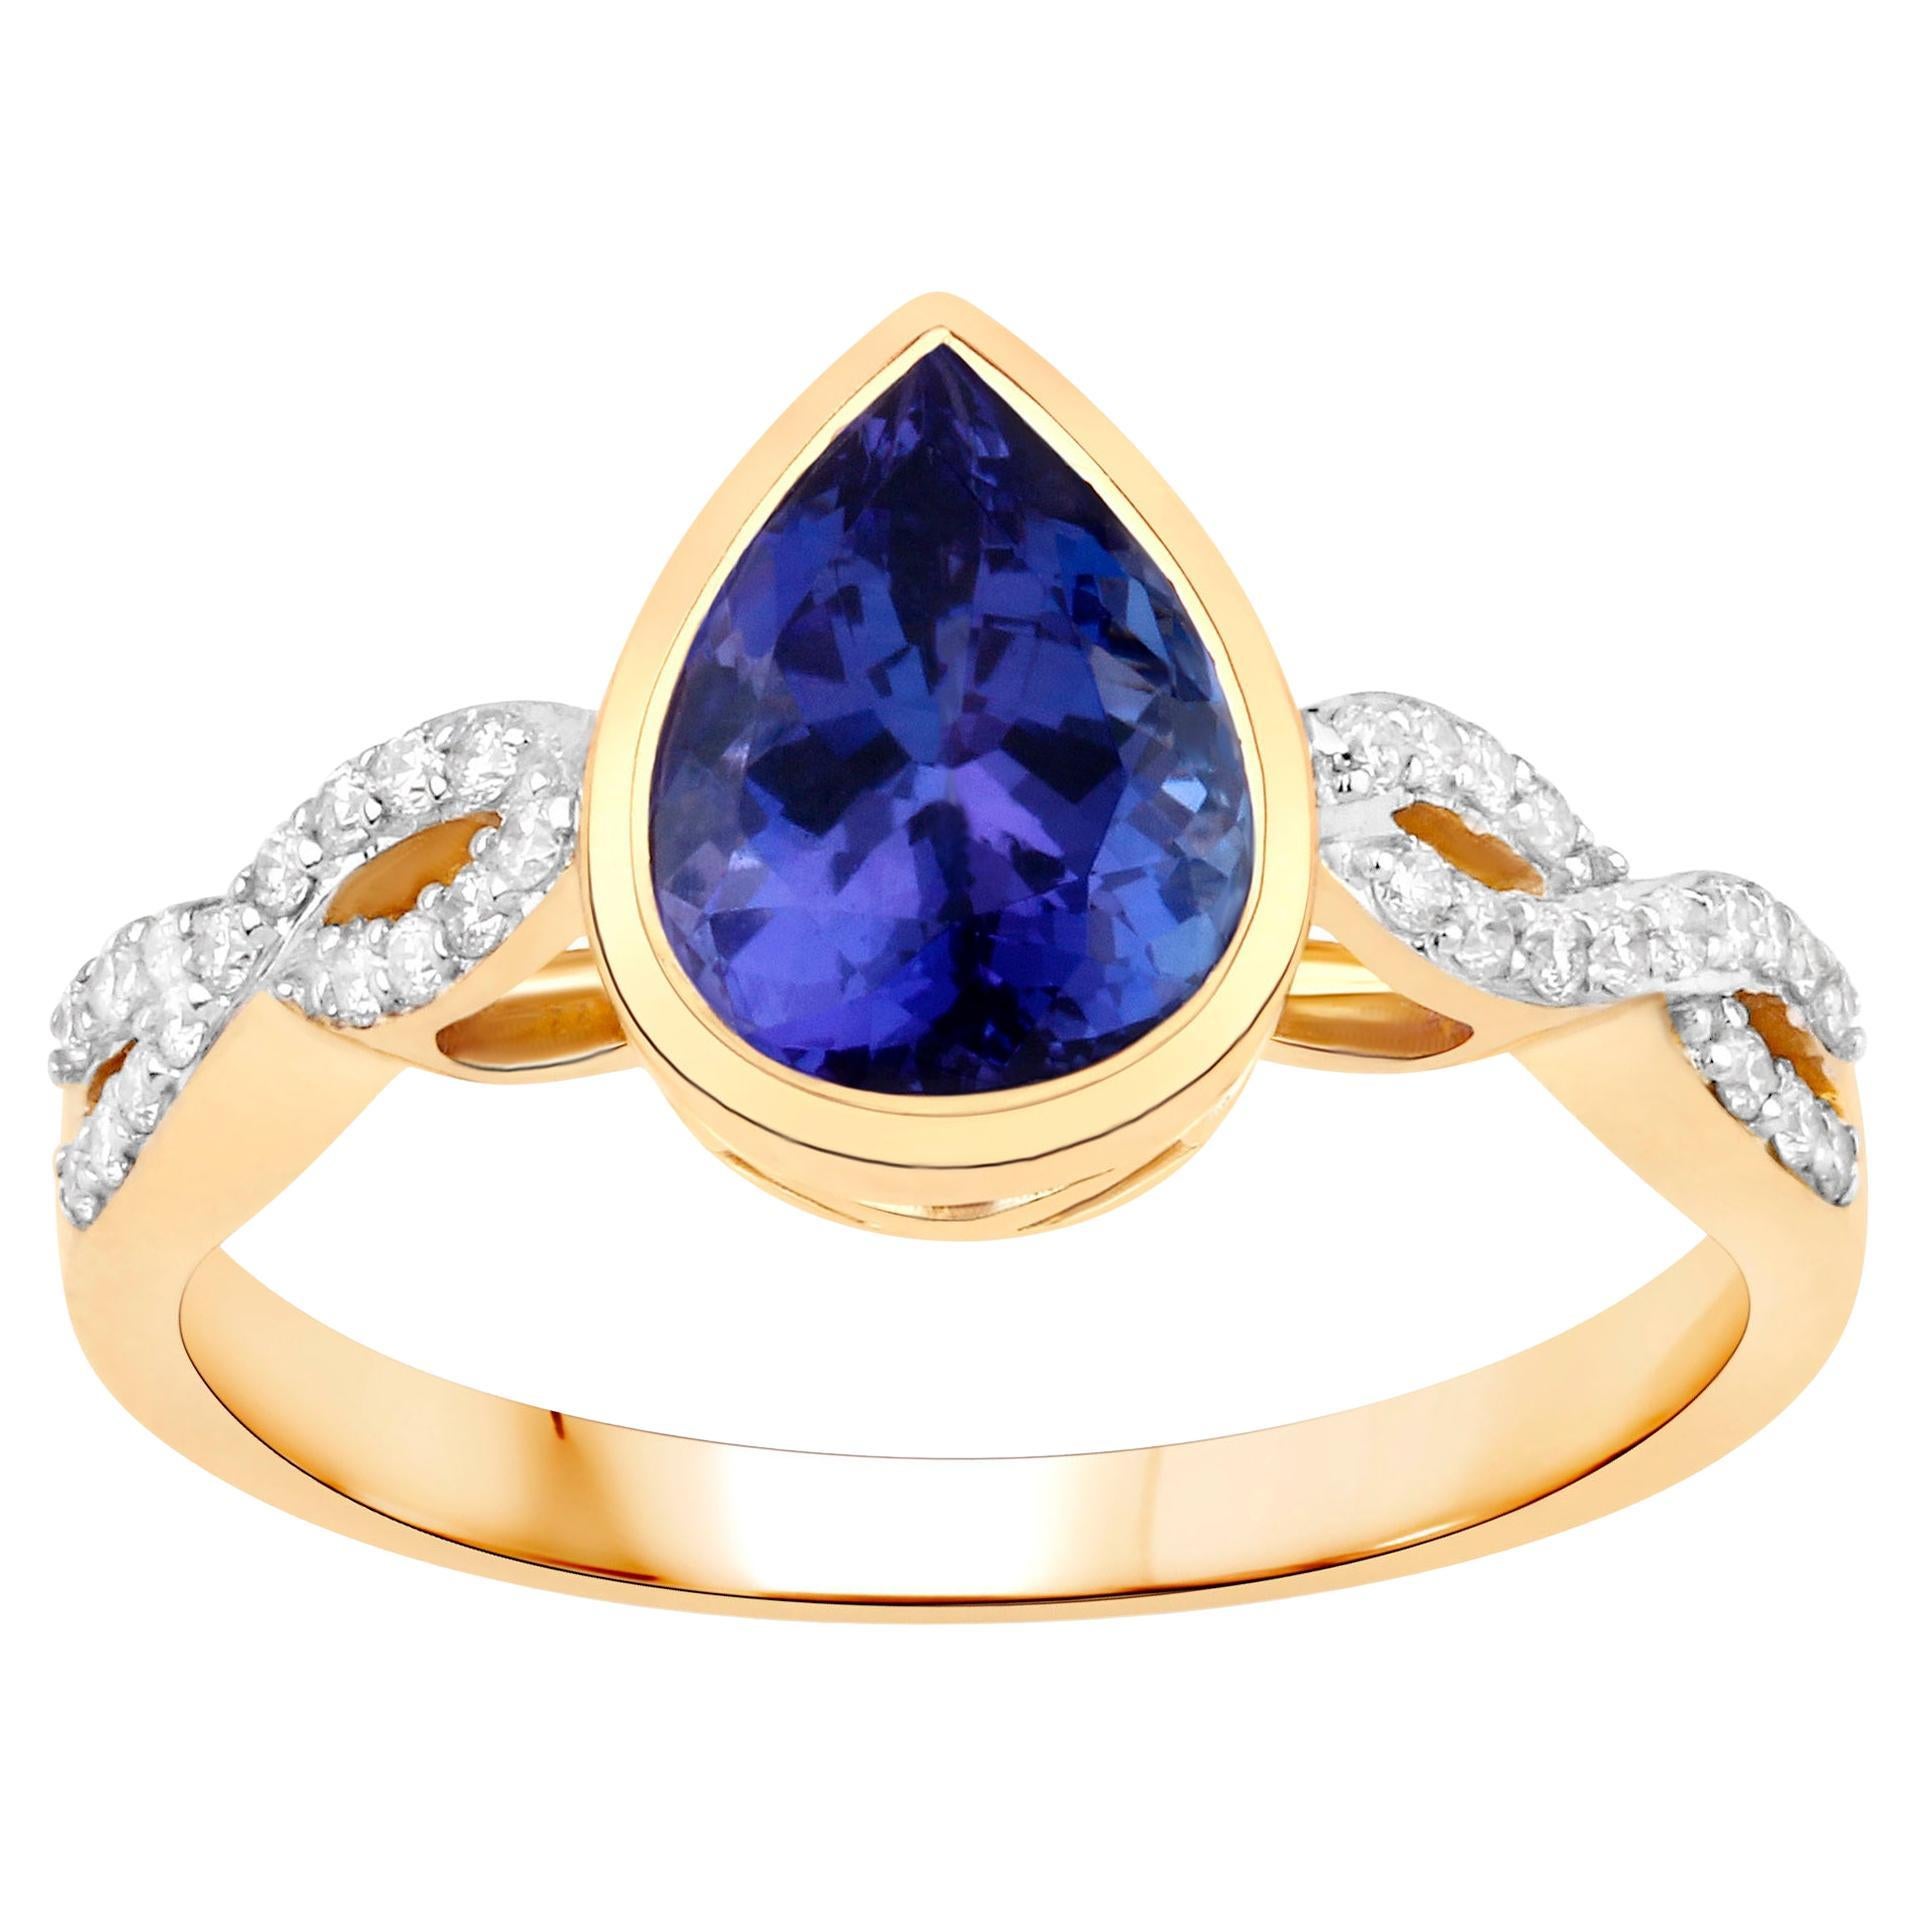 Tanzanite Ring With Diamonds 2.01 Carats 14K Yellow Gold For Sale